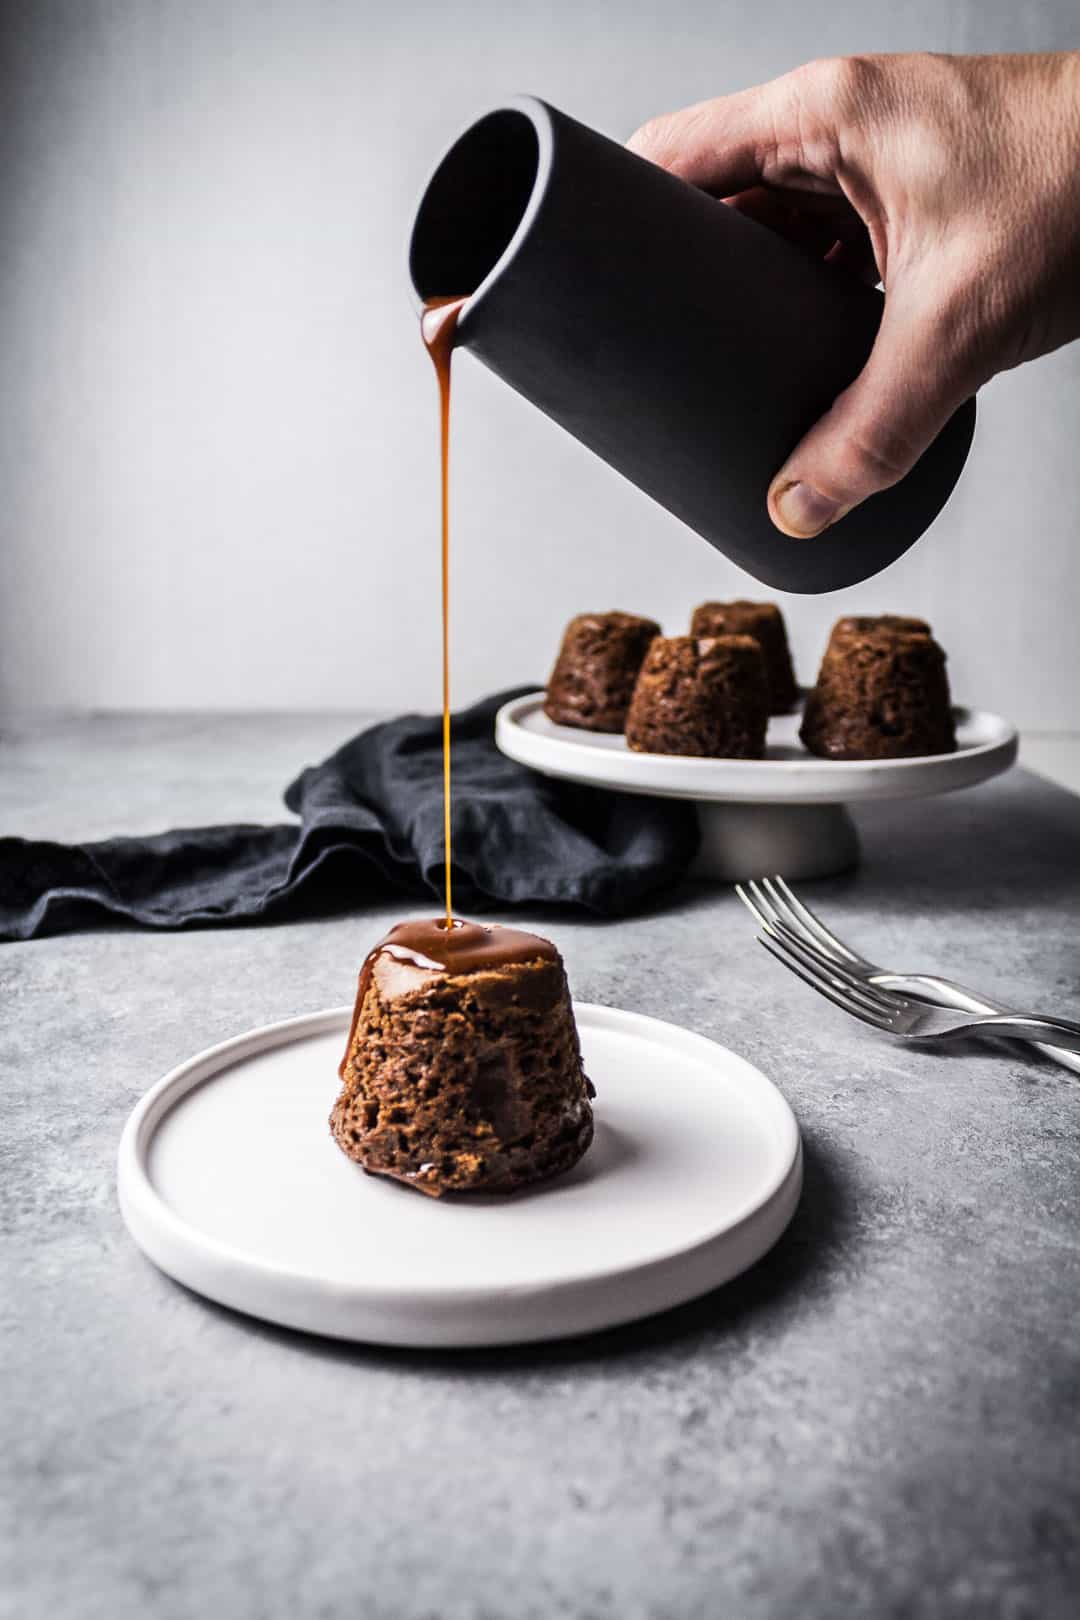 Front view of an apple ginger mini cake with a hand holding a ceramic pitcher pouring salted caramel sauce onto the cake